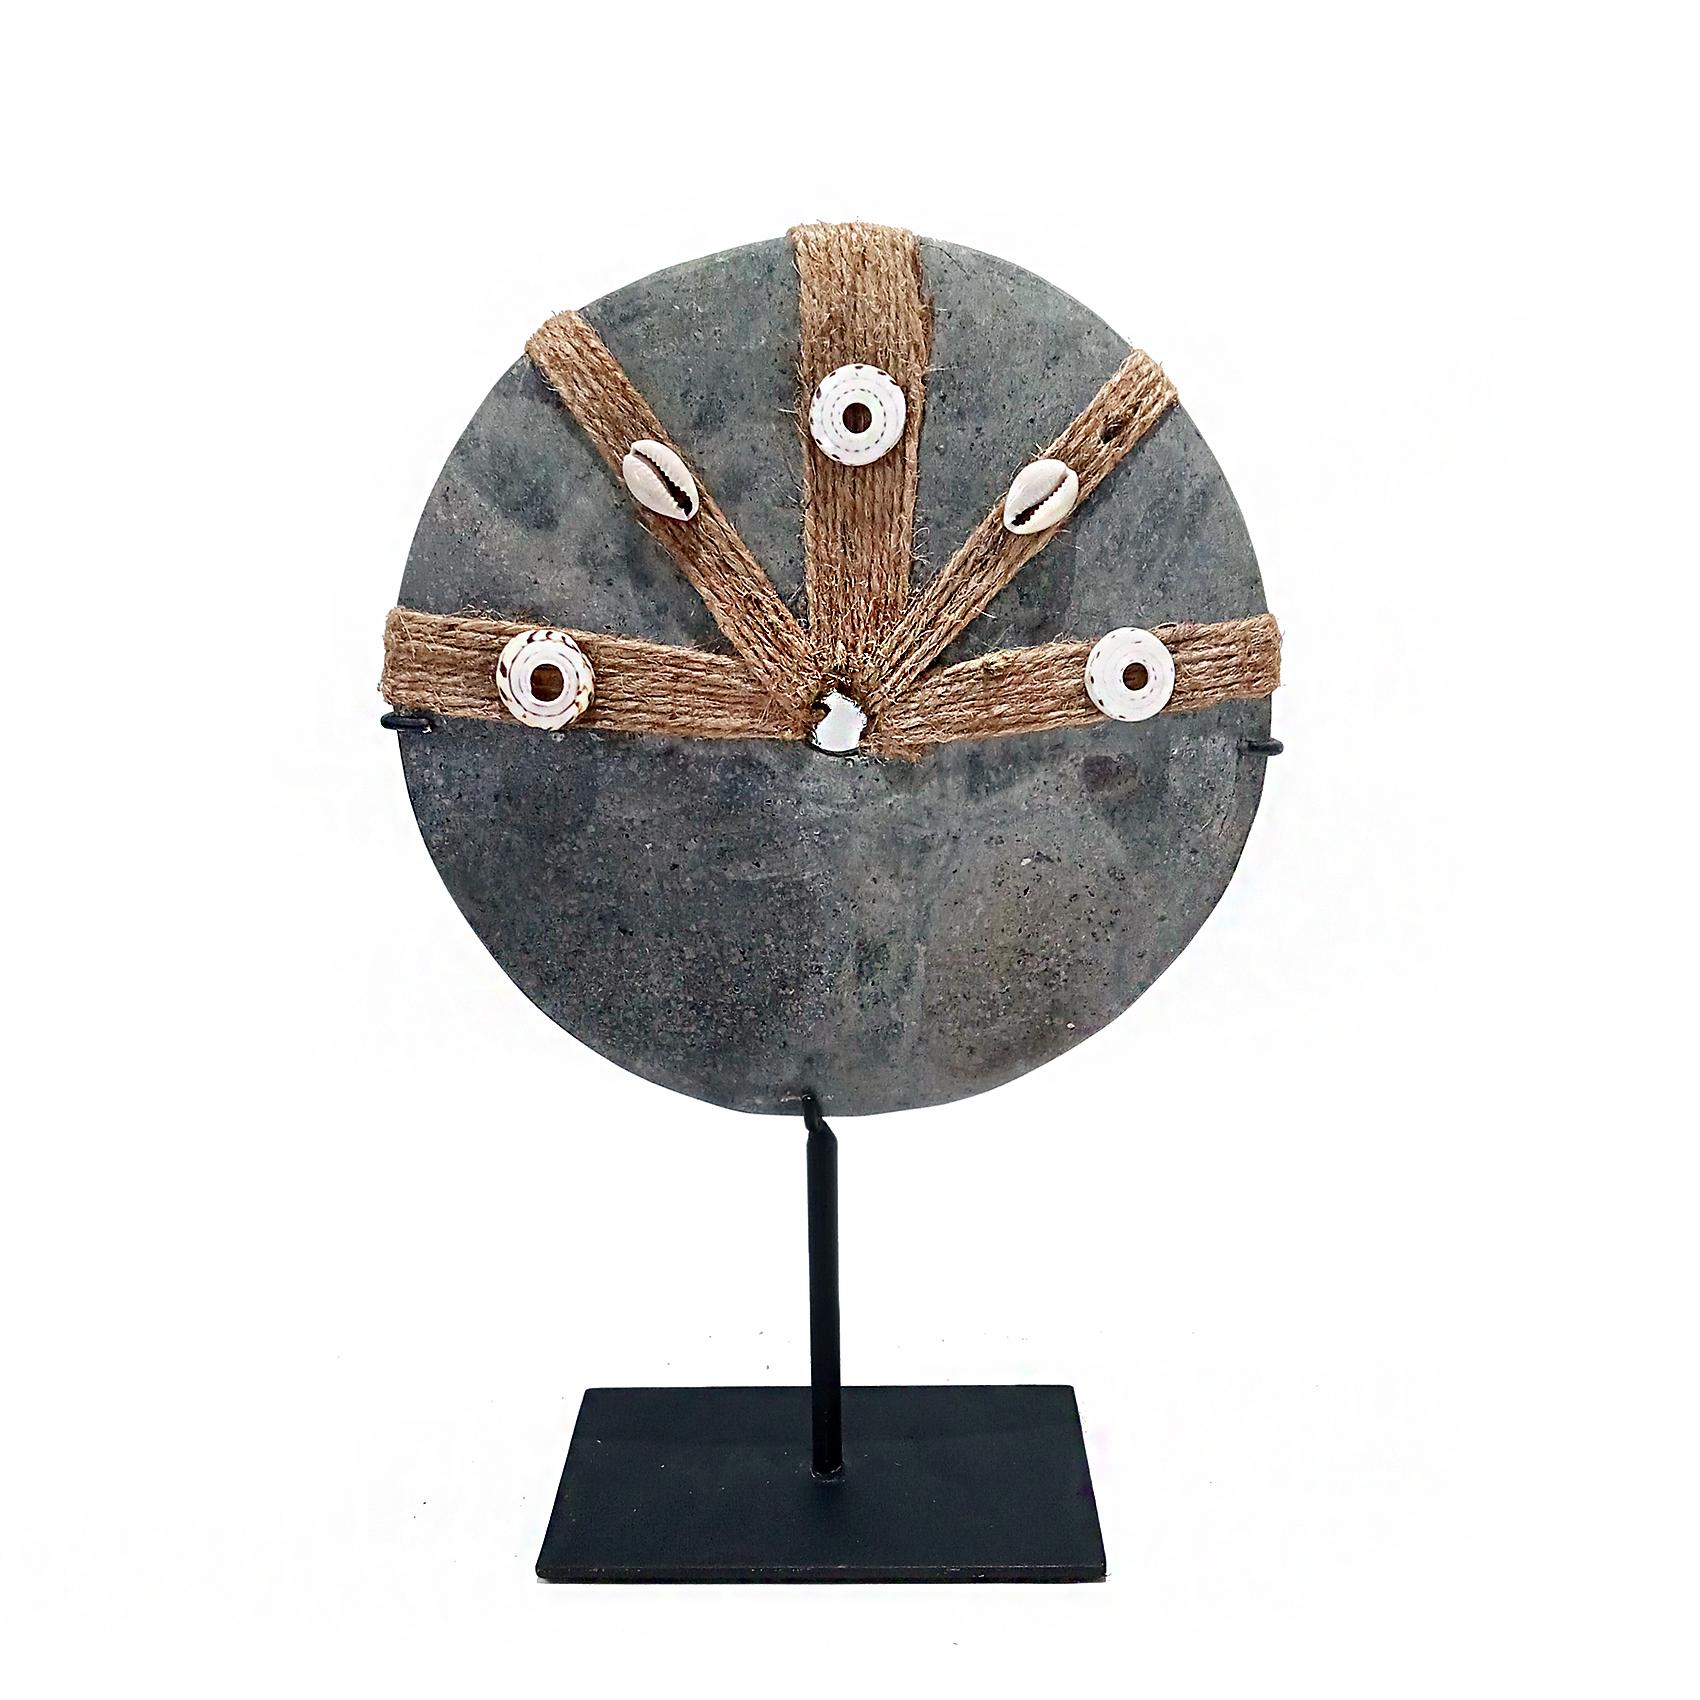 A decorative stone coin from Bali, Indonesia. Grey stone with raffia rope and seashell appliques. Mounted on a made-to-measure black metal stand. 

 8 inches in diameter, 12 inches high, on a black metal stand with a 3